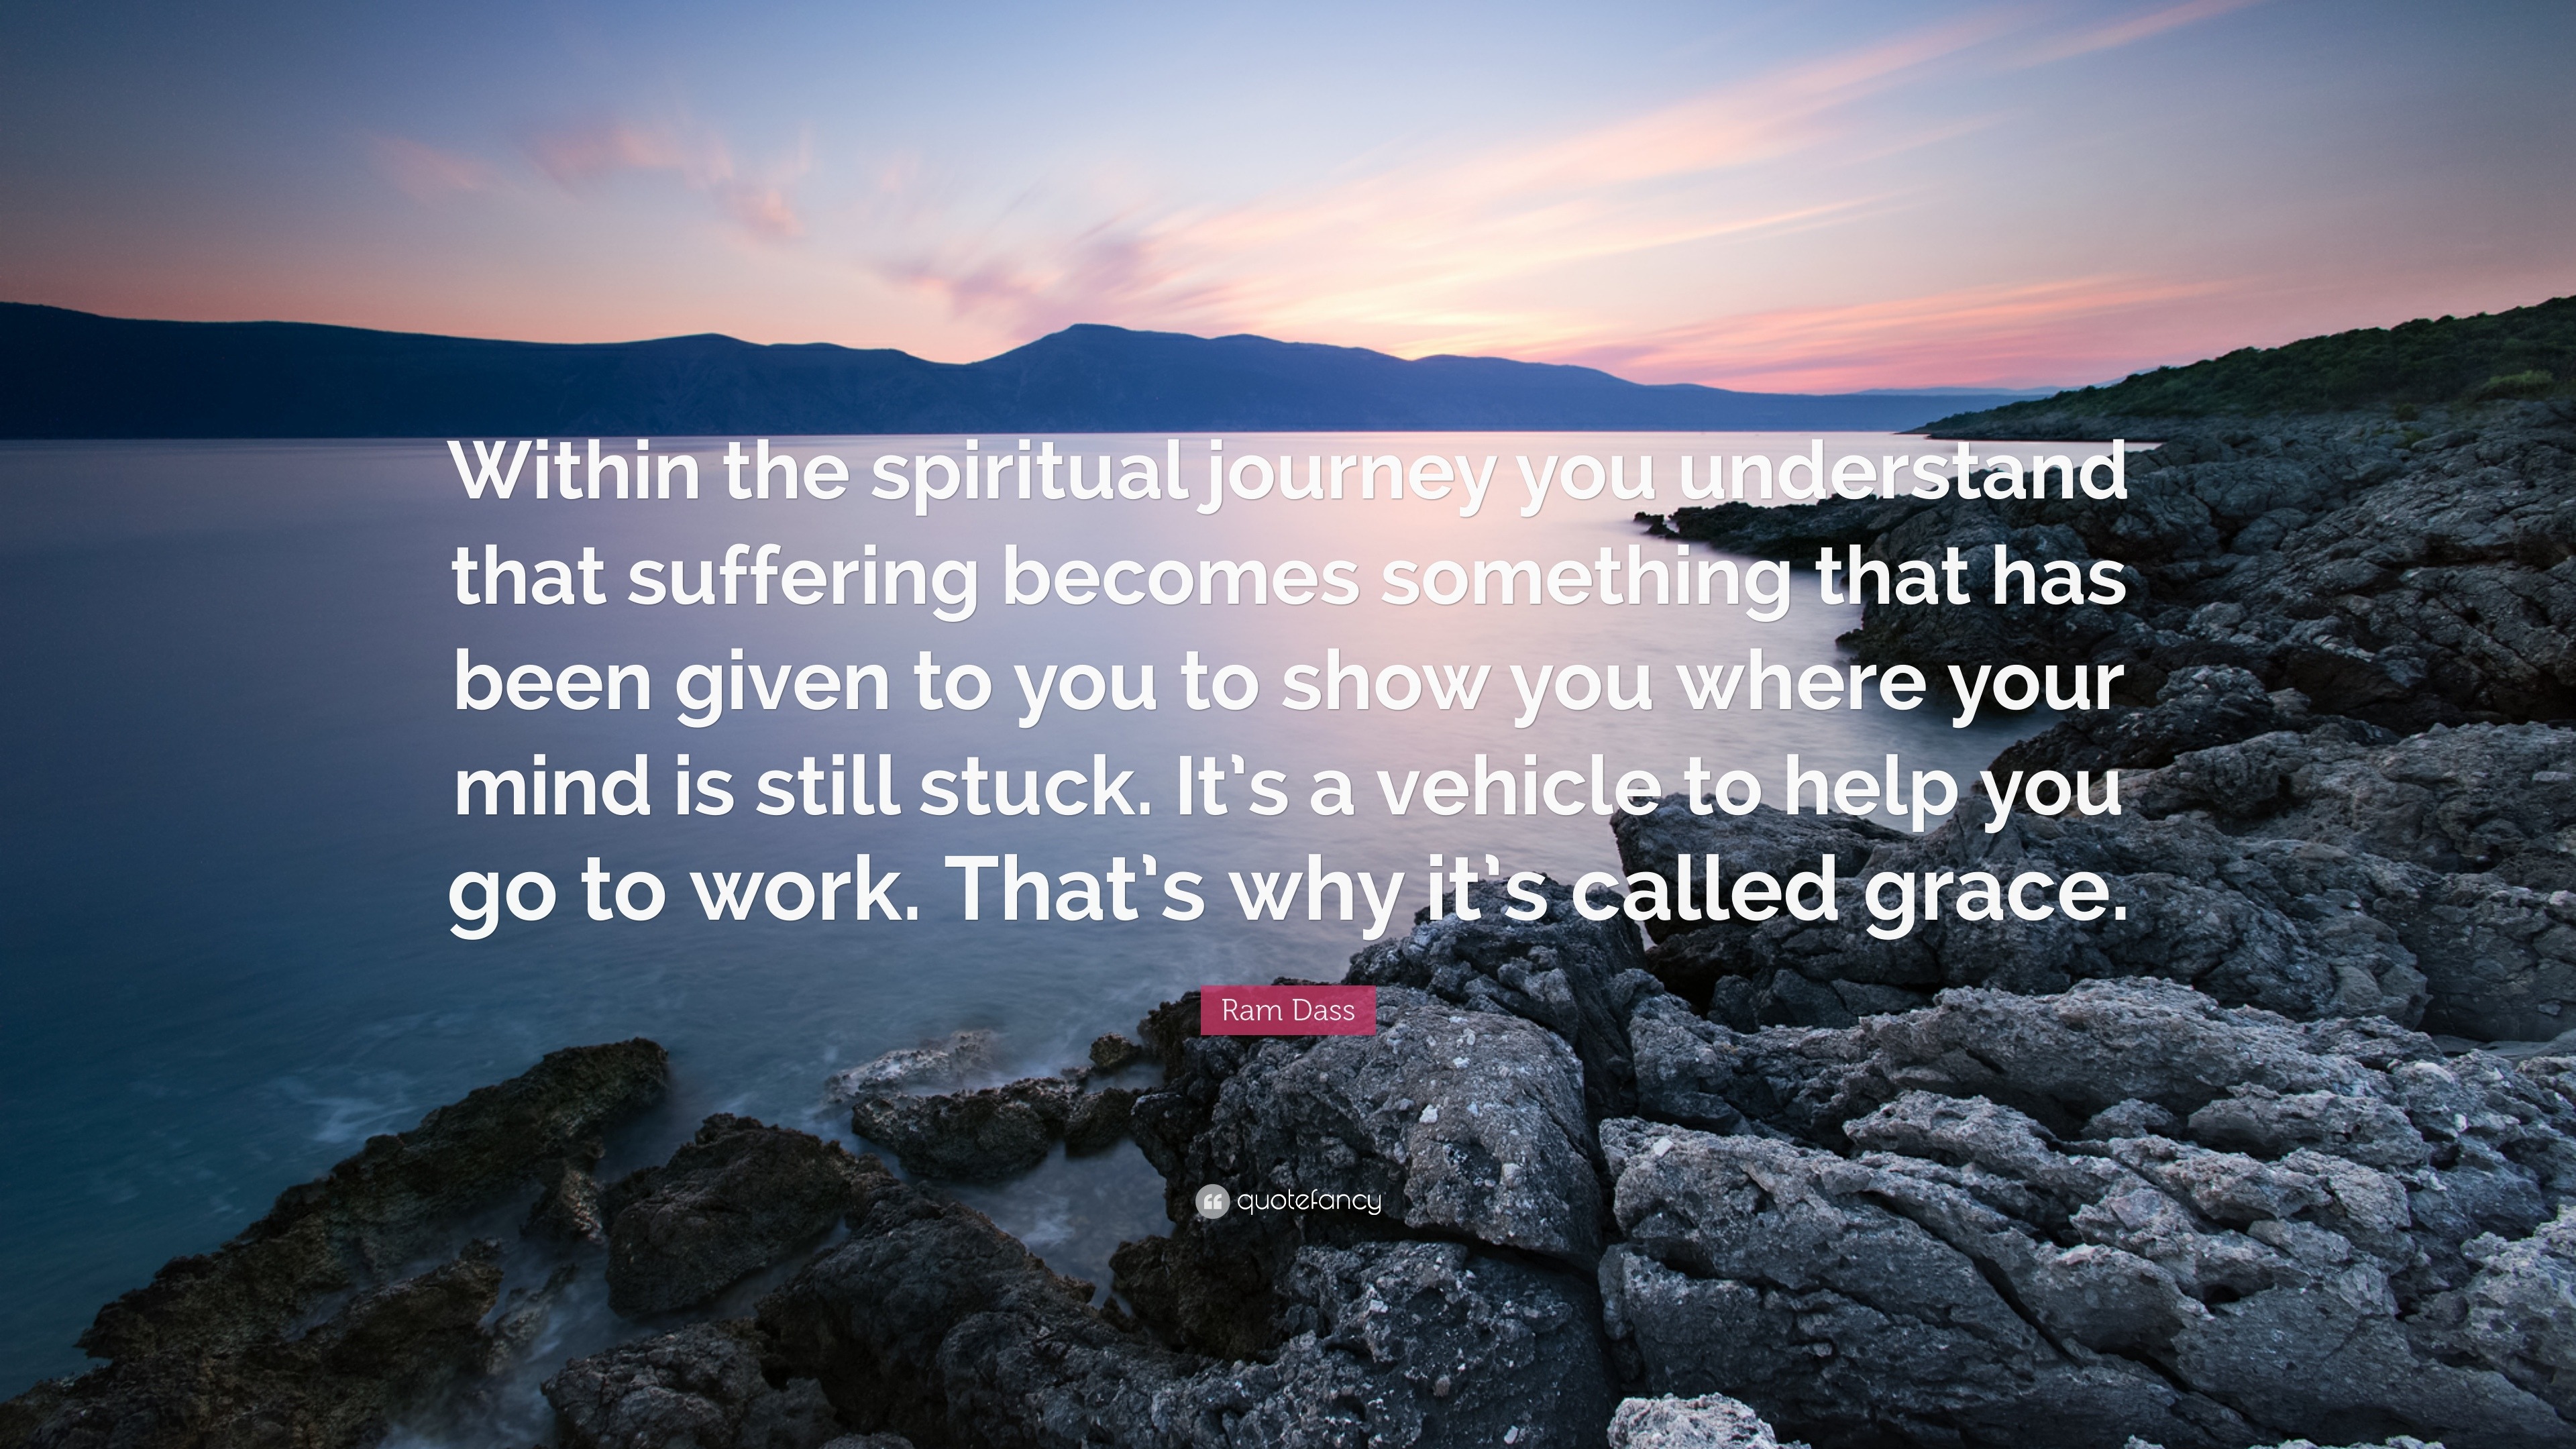 Ram Dass Quote: "Within the spiritual journey you ...